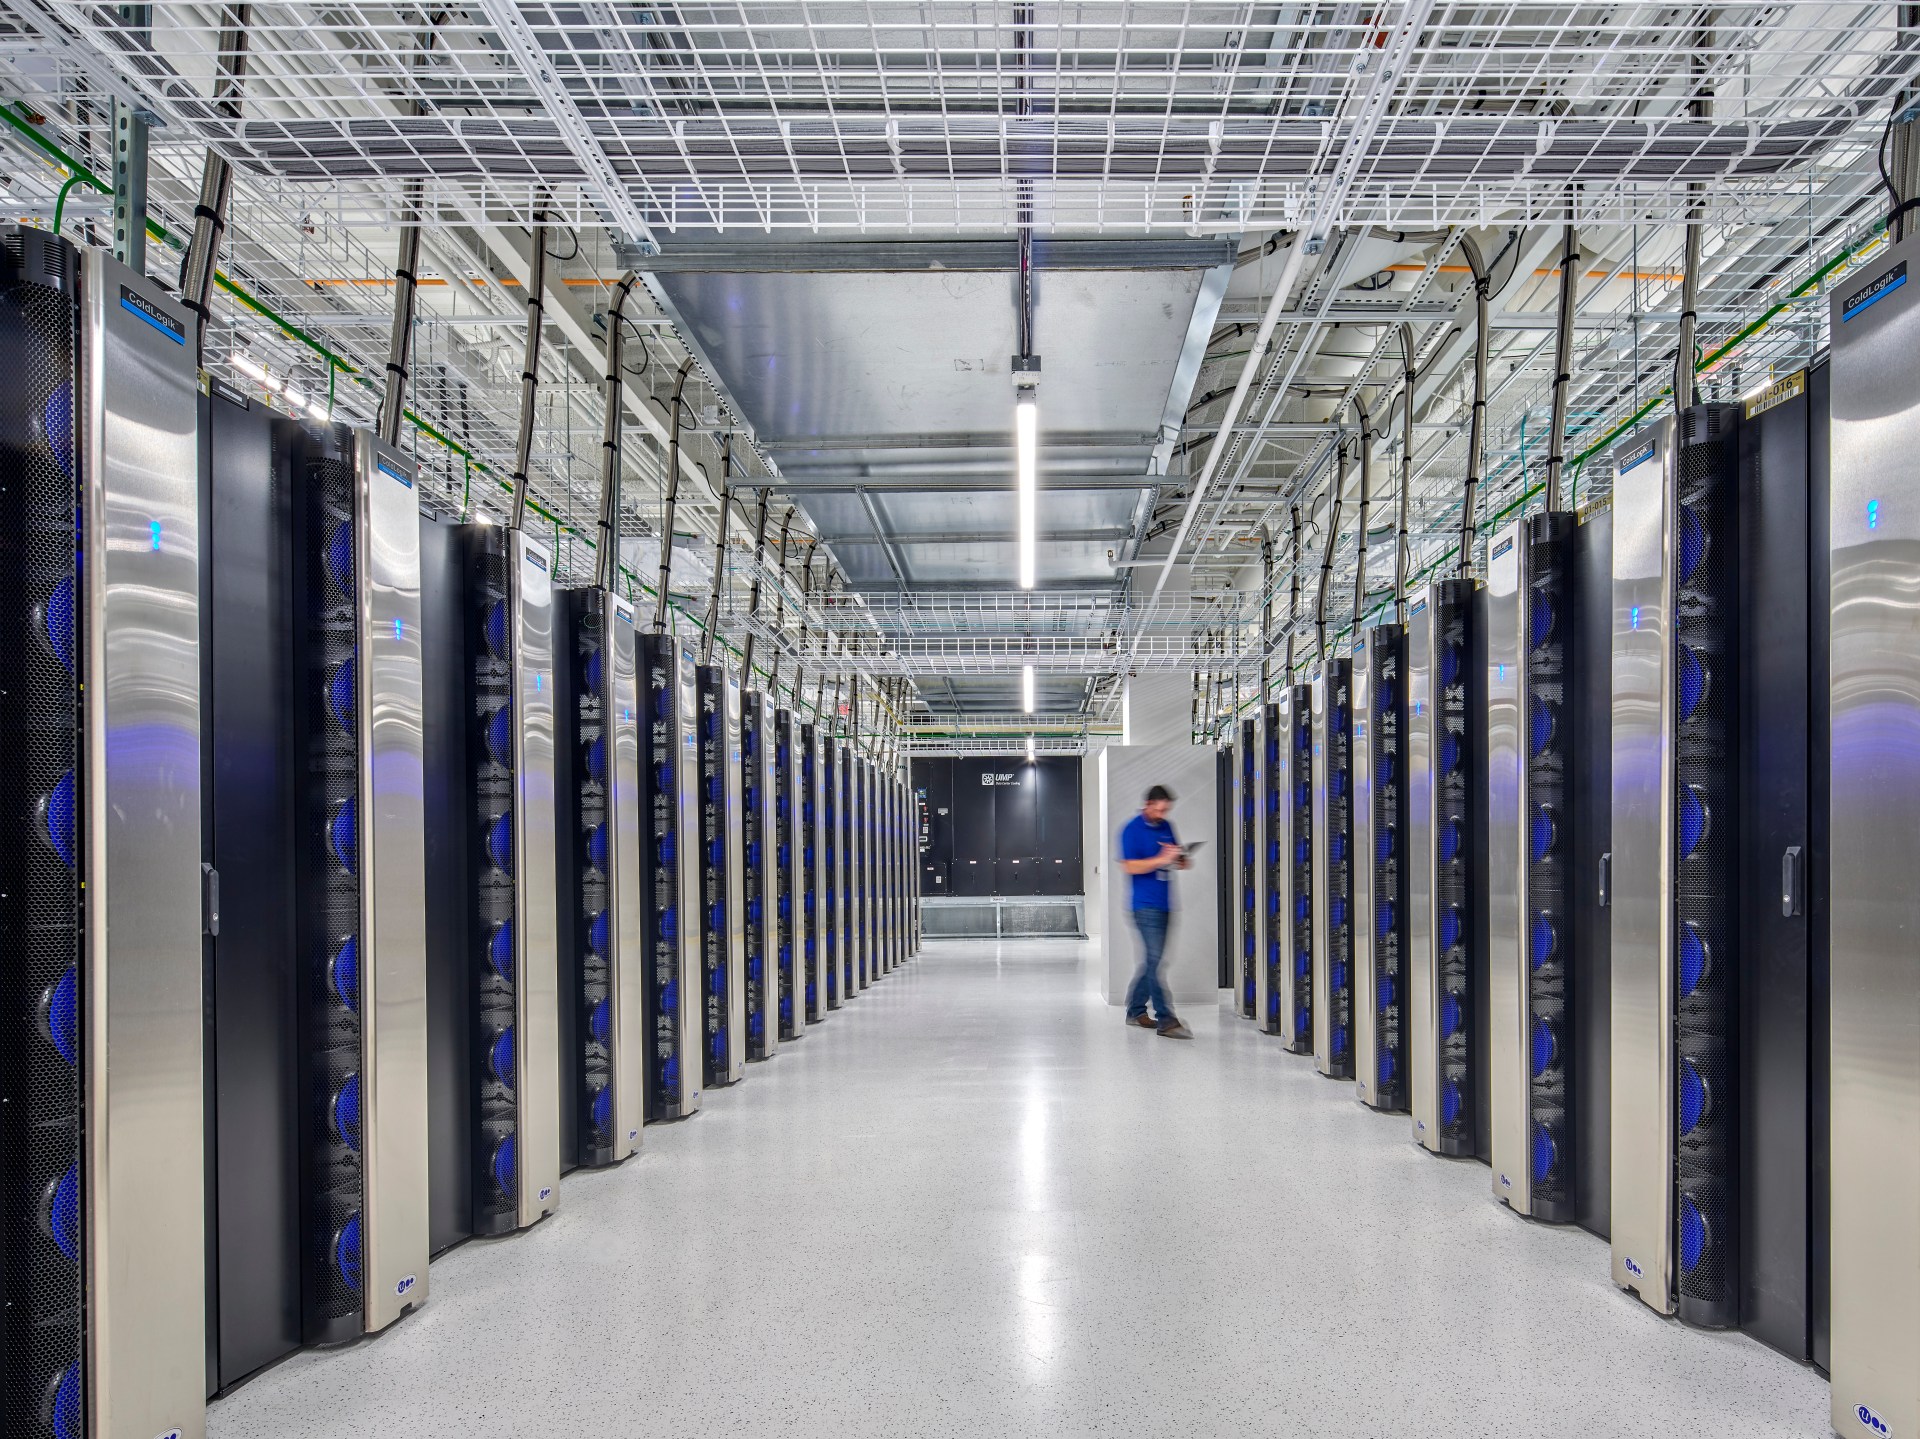 Colocation 101: A Complete Guide [What it is, Types, Features, How it Works, Benefits]